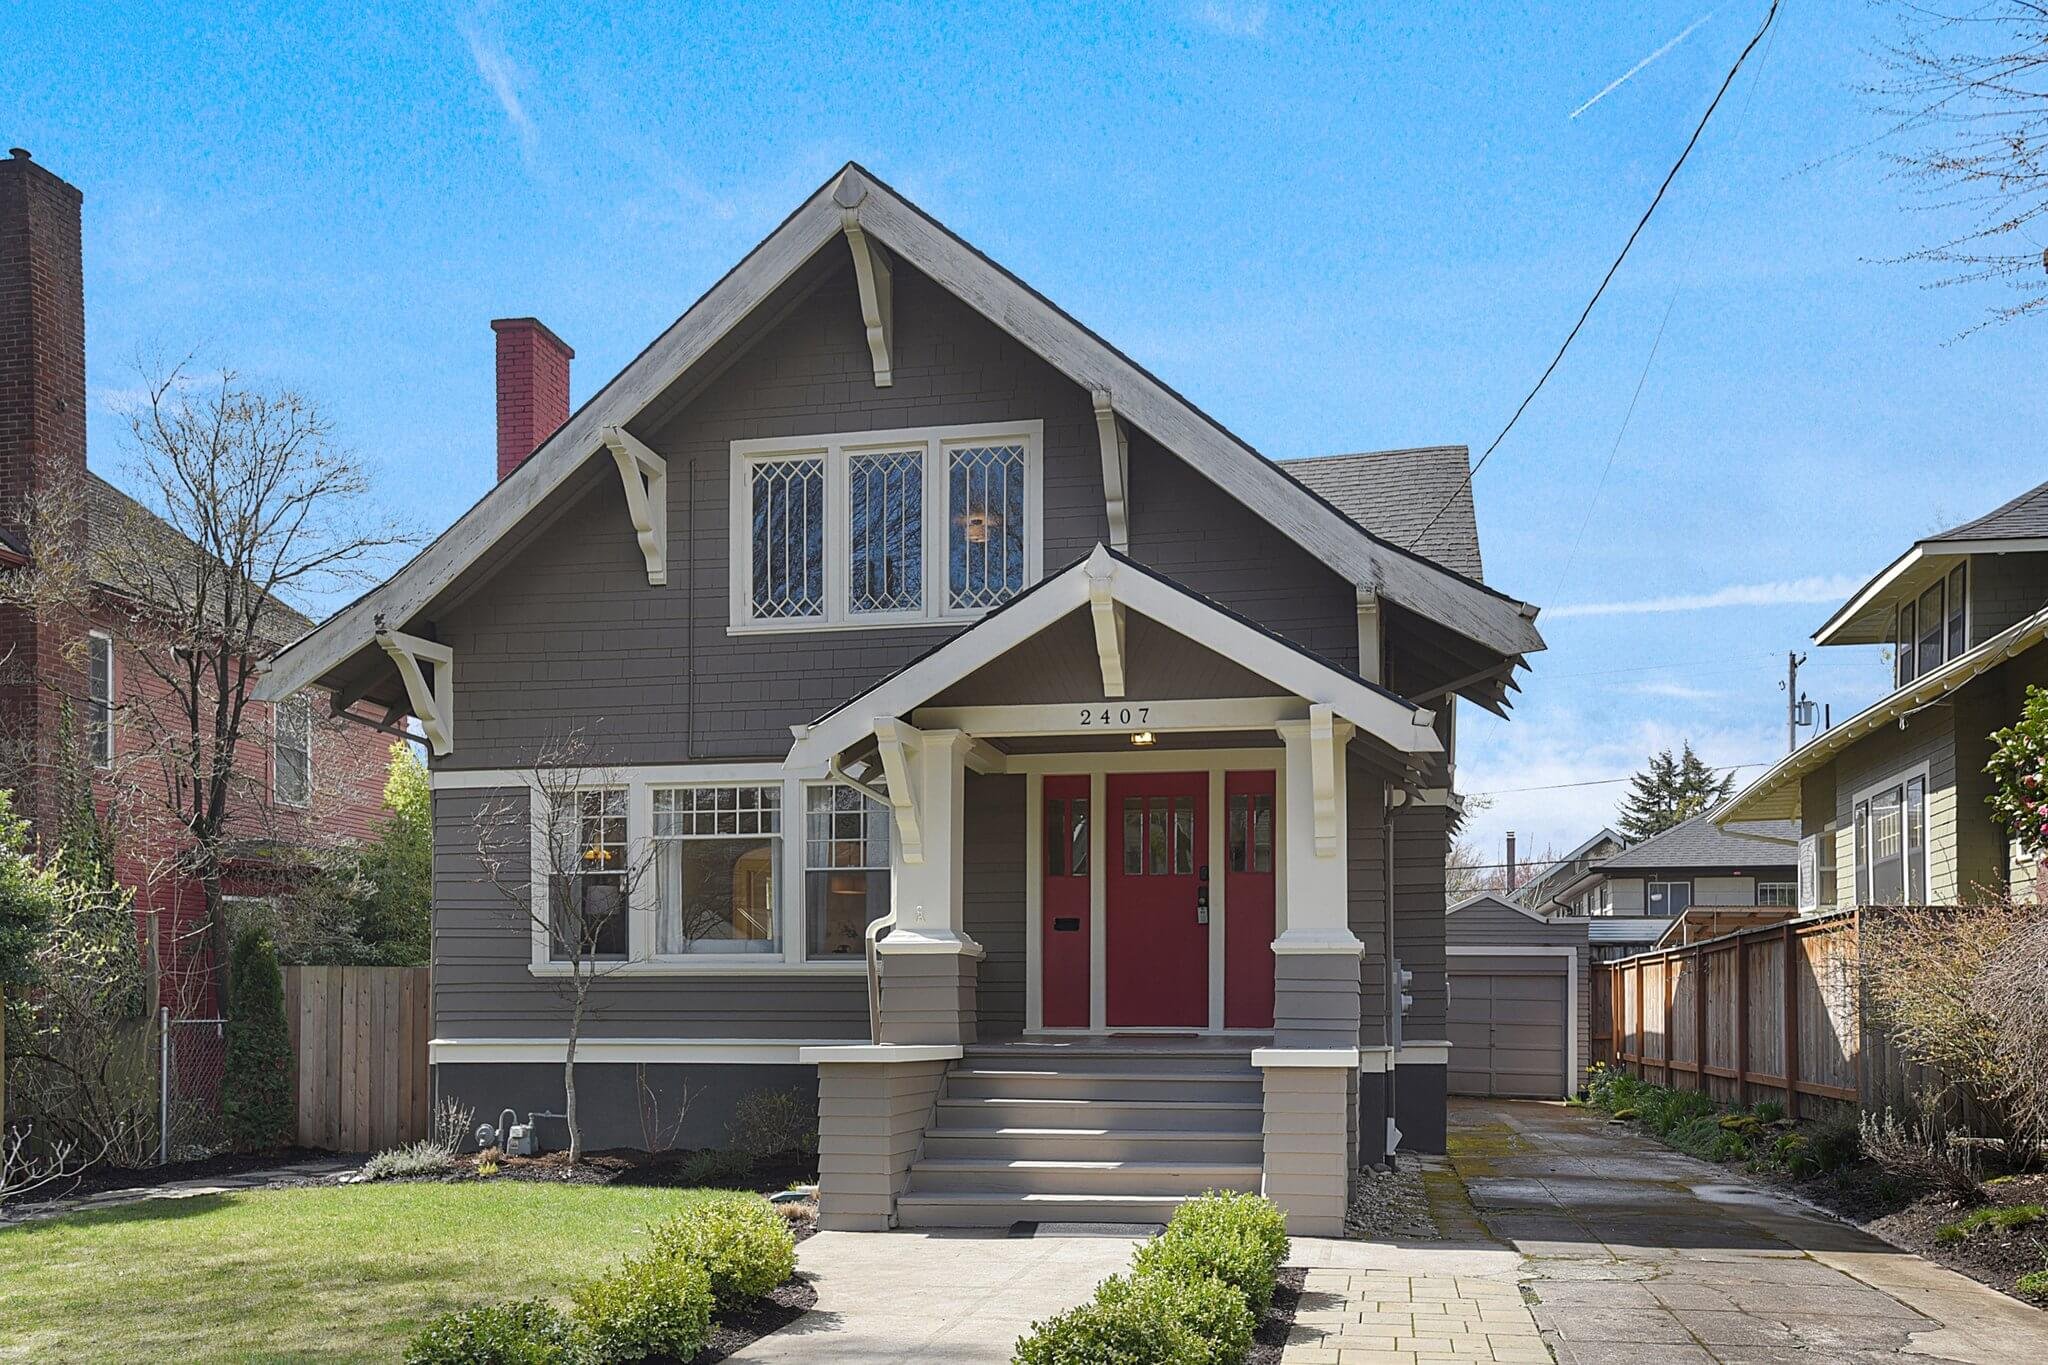 2407 NE 10th Ave. &lt;strong&gt;SOLD&lt;/strong&gt;